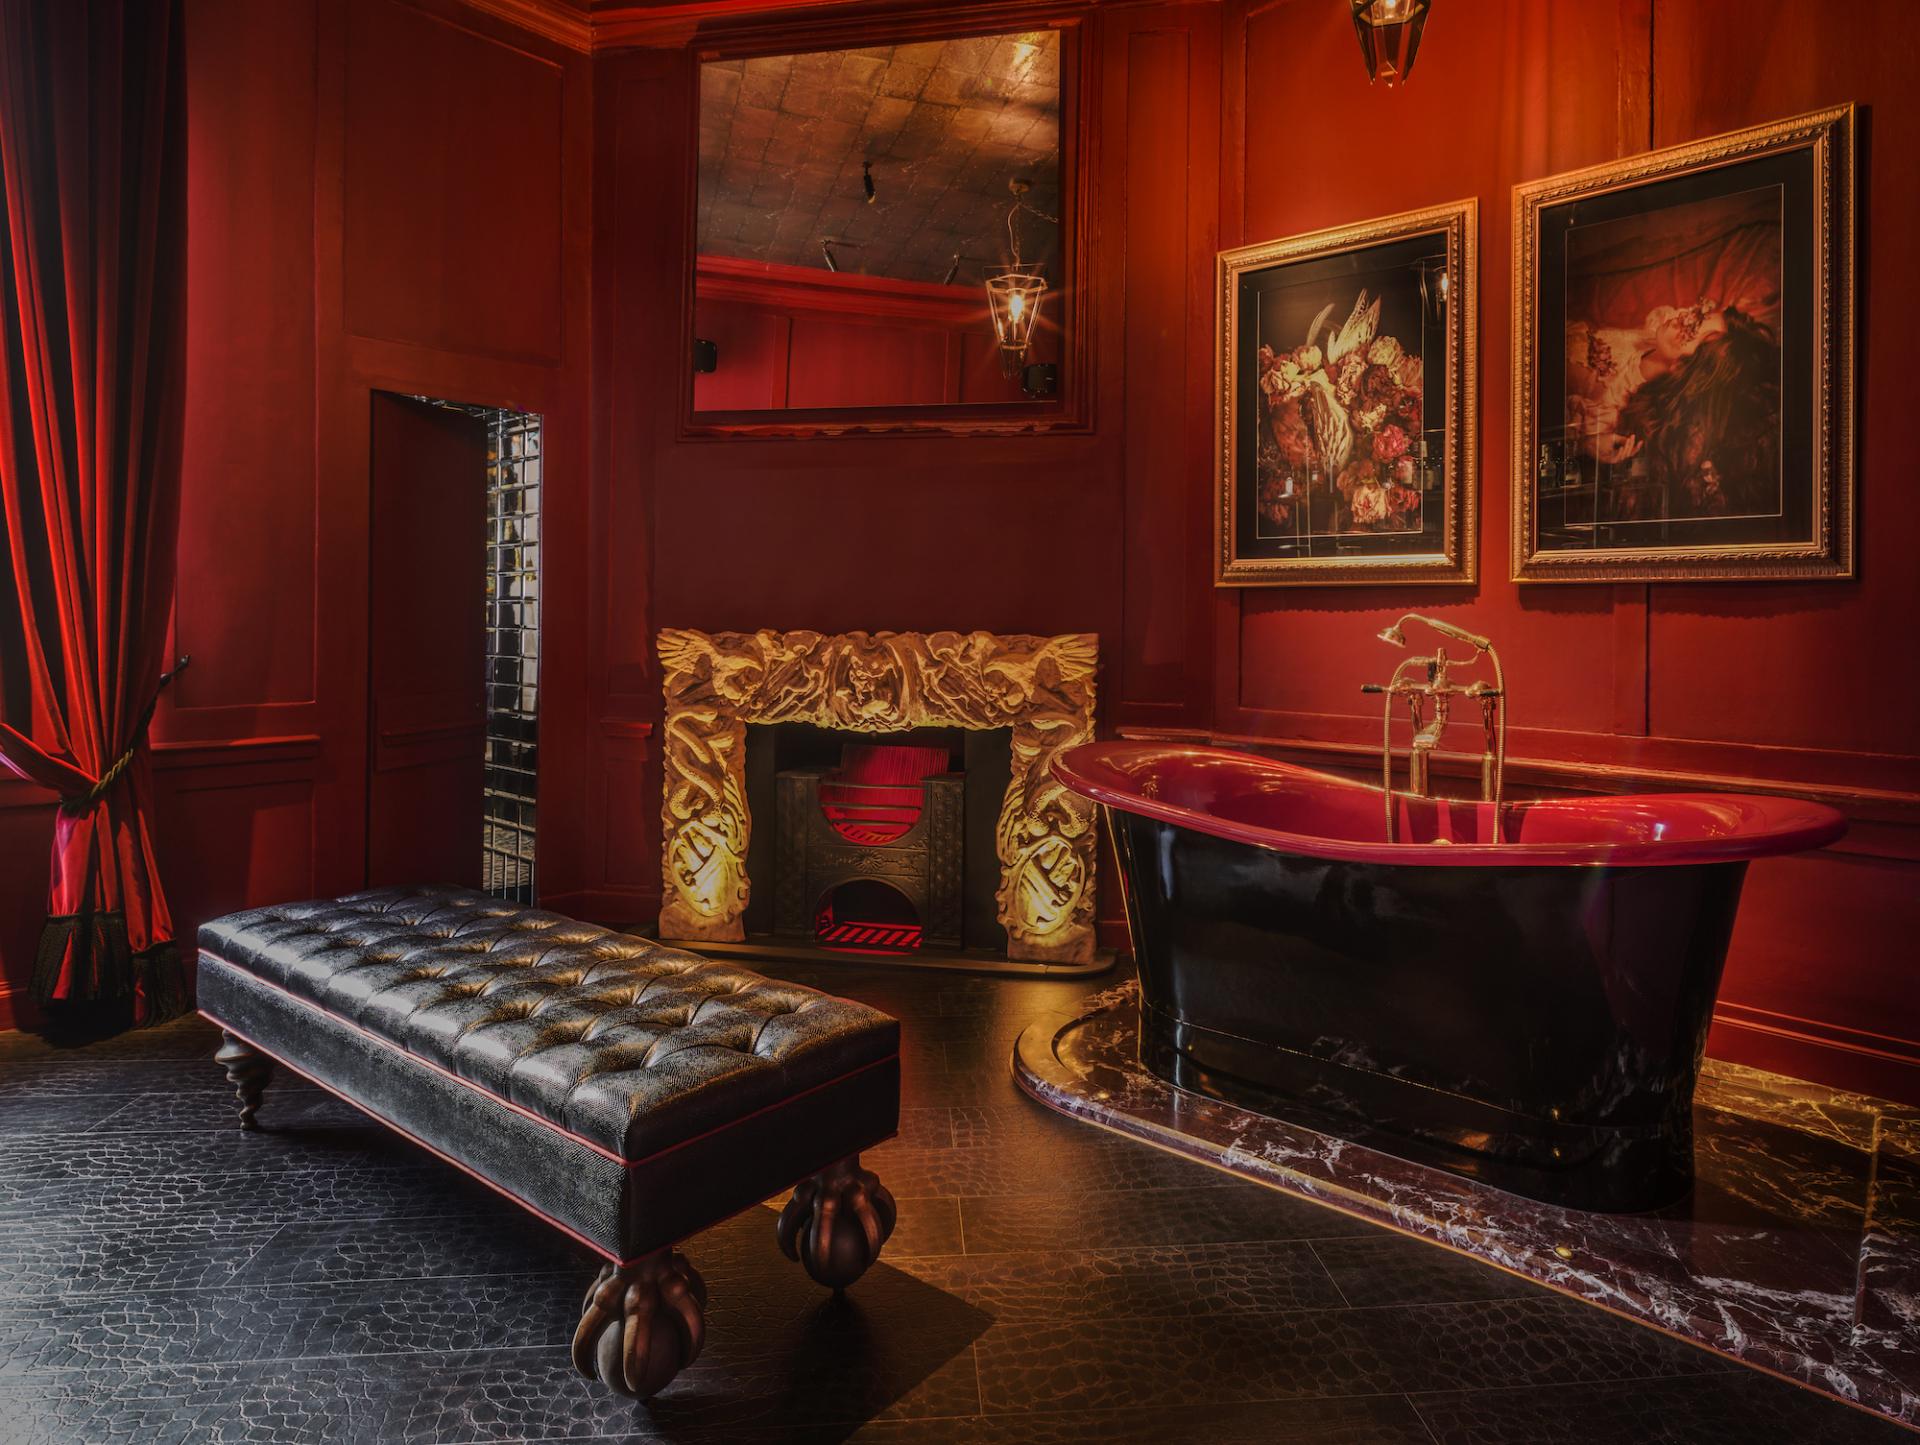 The New Chateau Denmark in London is a Whimsical Celebration of Rock-and-roll Chic